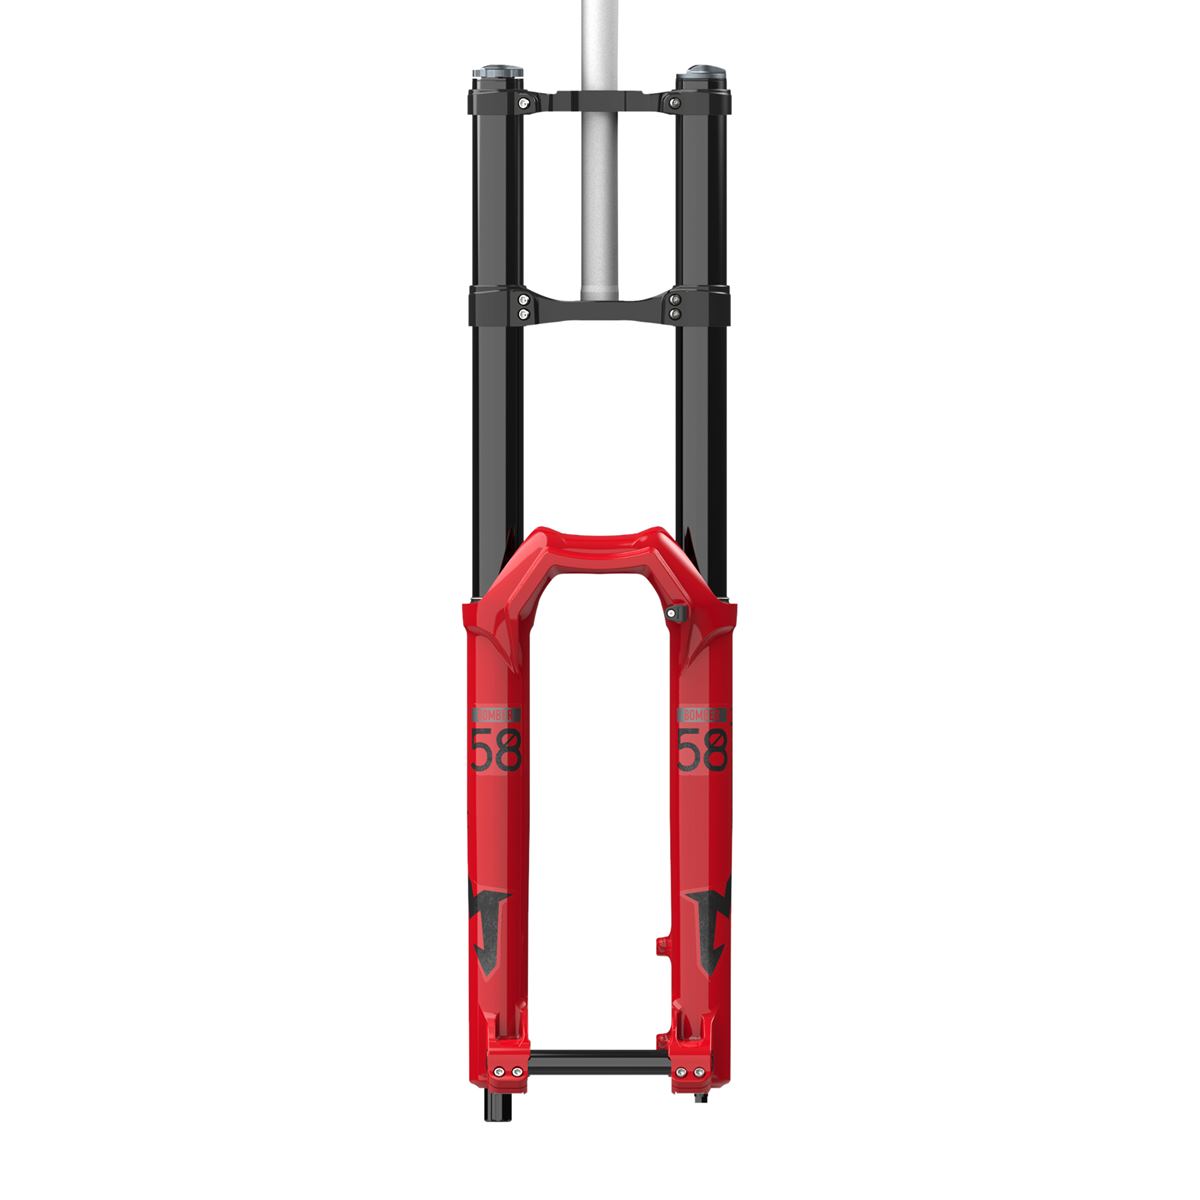 Marzocchi Suspension Fork Bomber 58 27.5 Zoll, 203 mm, 20TAx110 mm, GRIP, 51 mm Offset, Red